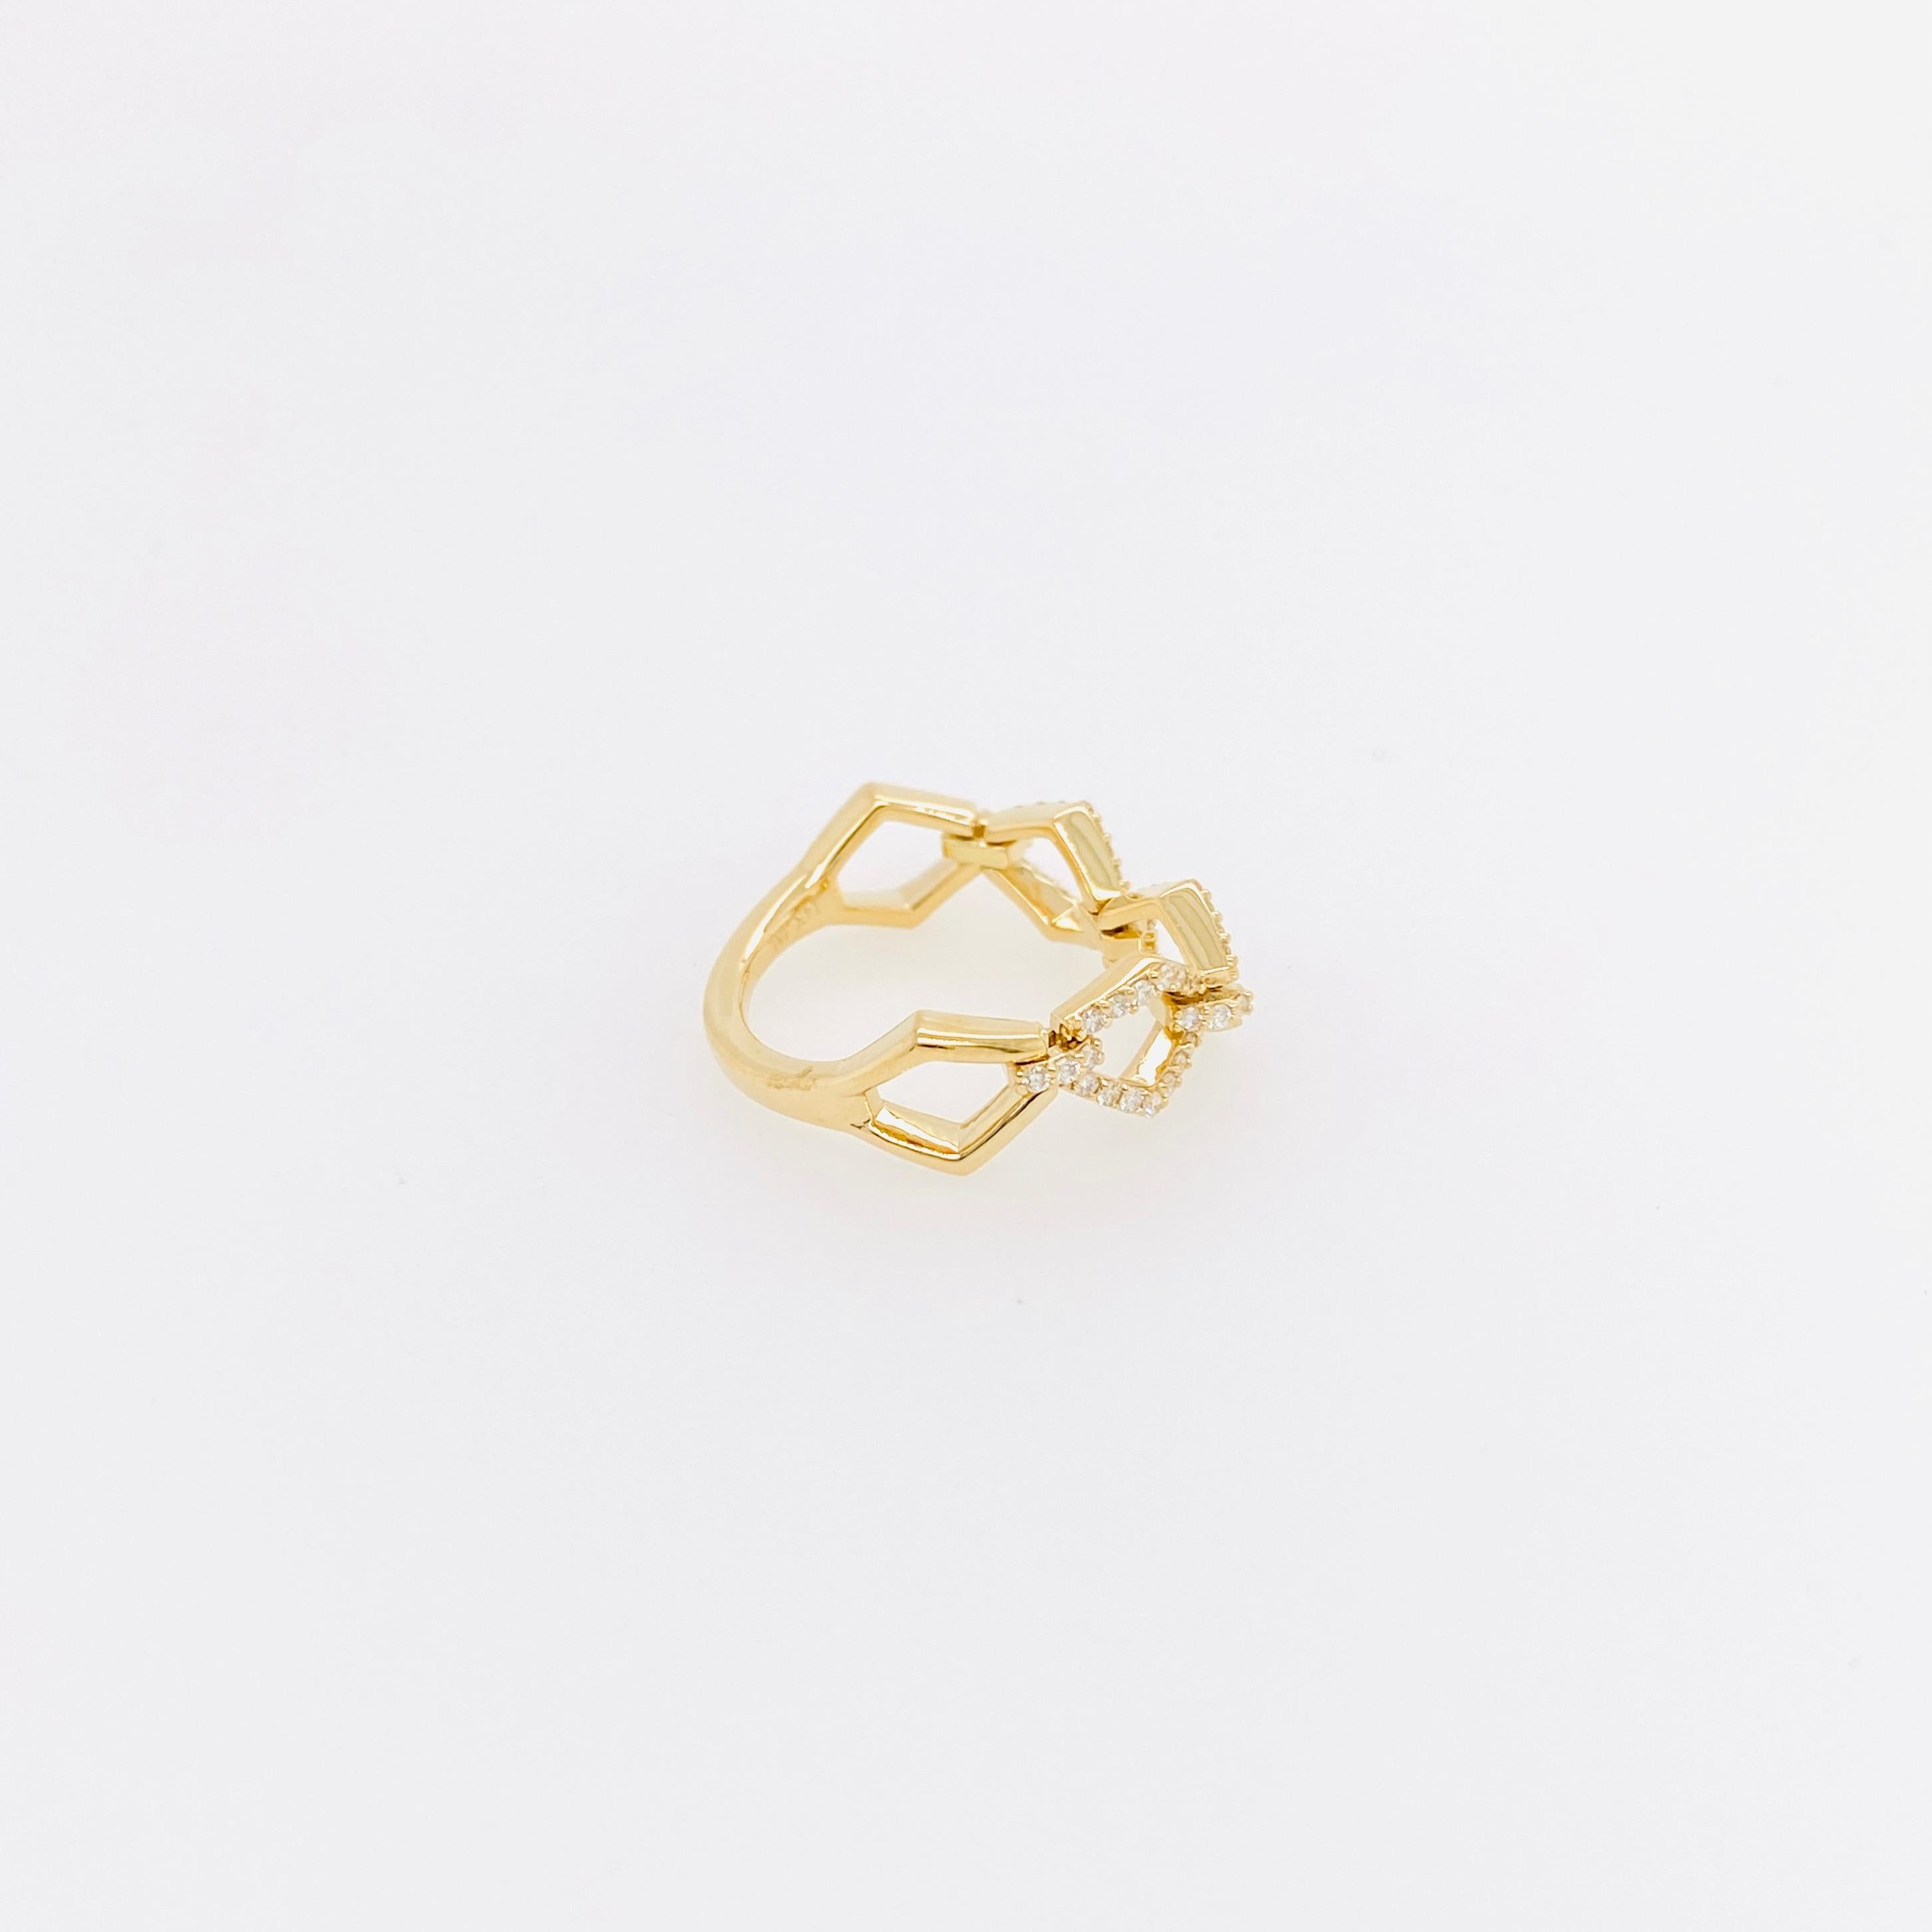 This unique hinged ring has 7 movable links w a total of 54 diamonds. When you want different and clever-this is your ring. Constructed out of durable 14 karat yellow gold this ring is comfortable with the 7 links fitting around your finger.  This